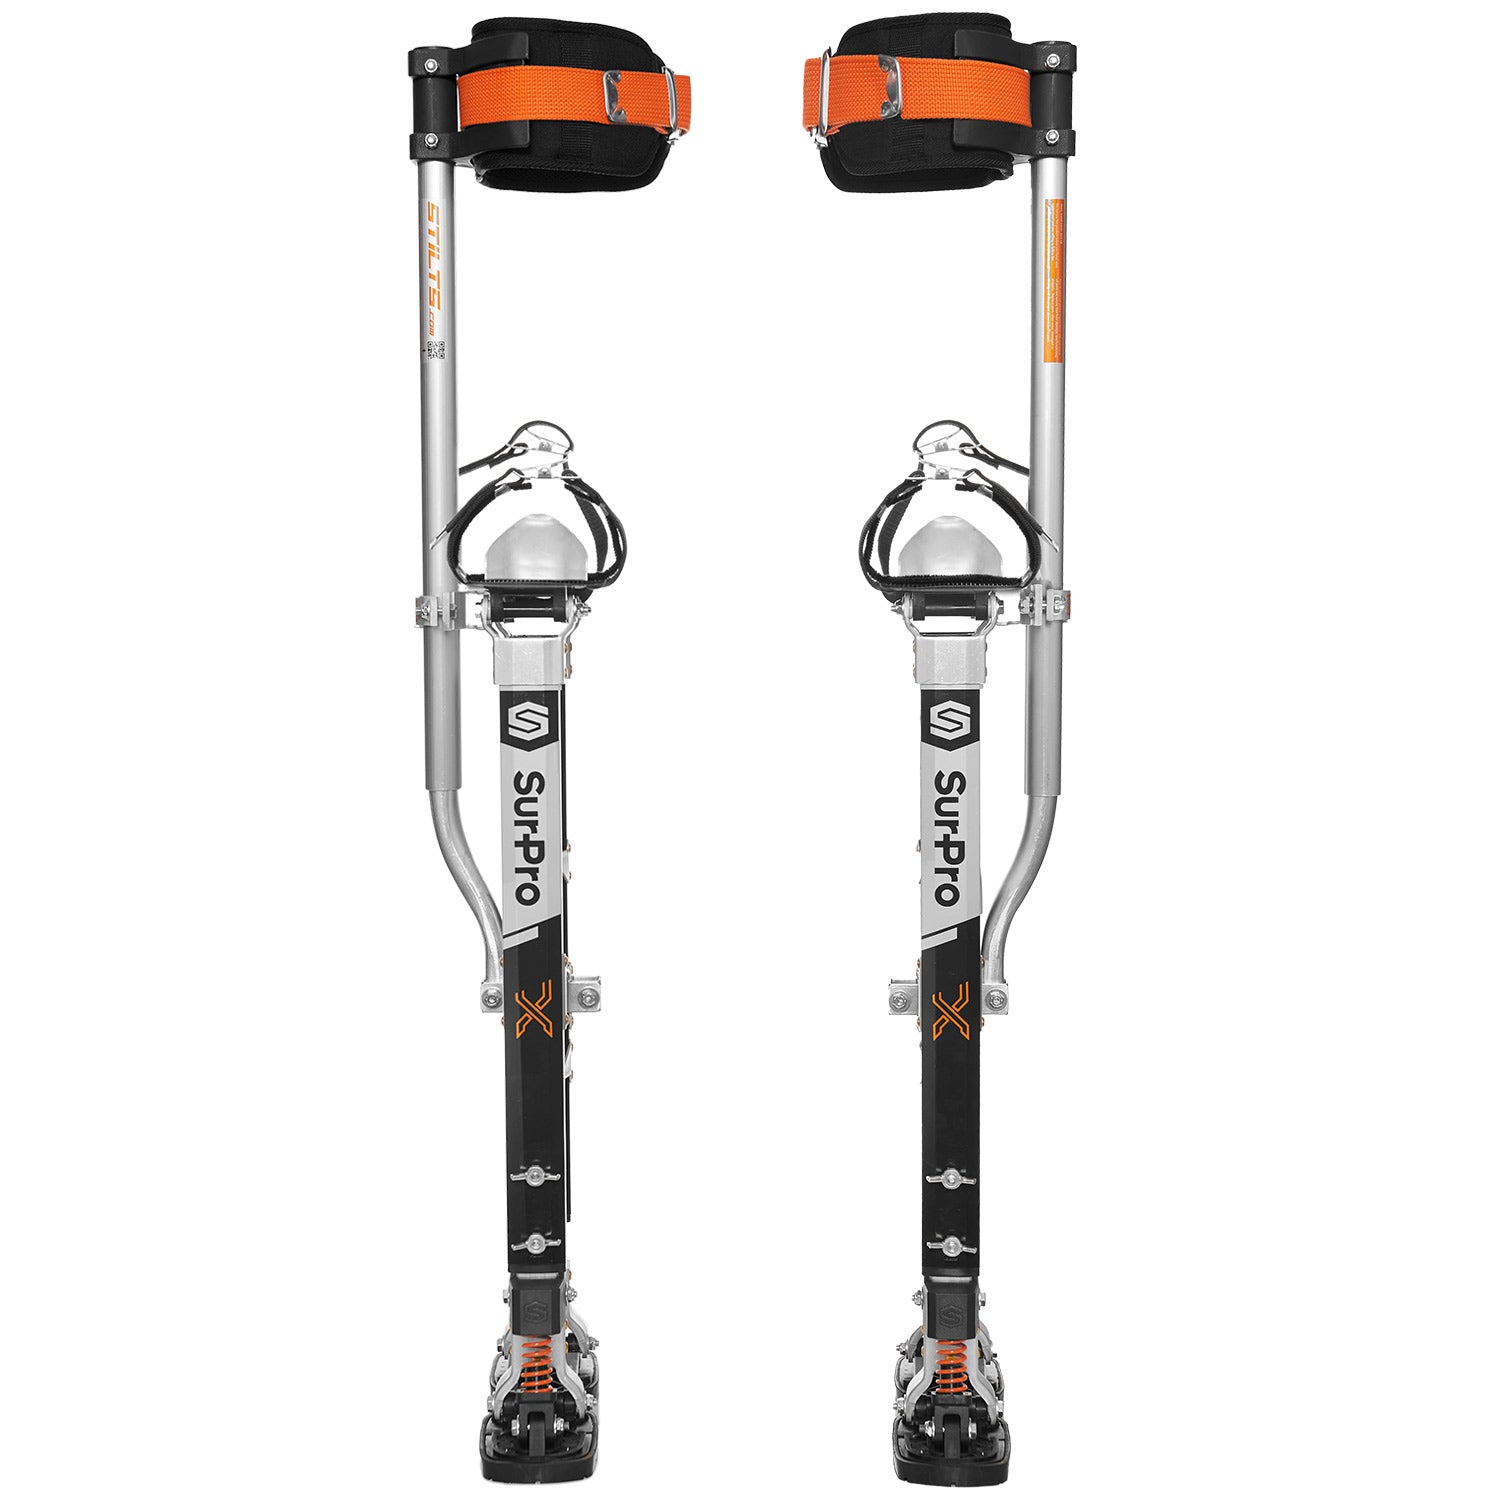 SurPro S1X Magnesium Drywall Stilts front view